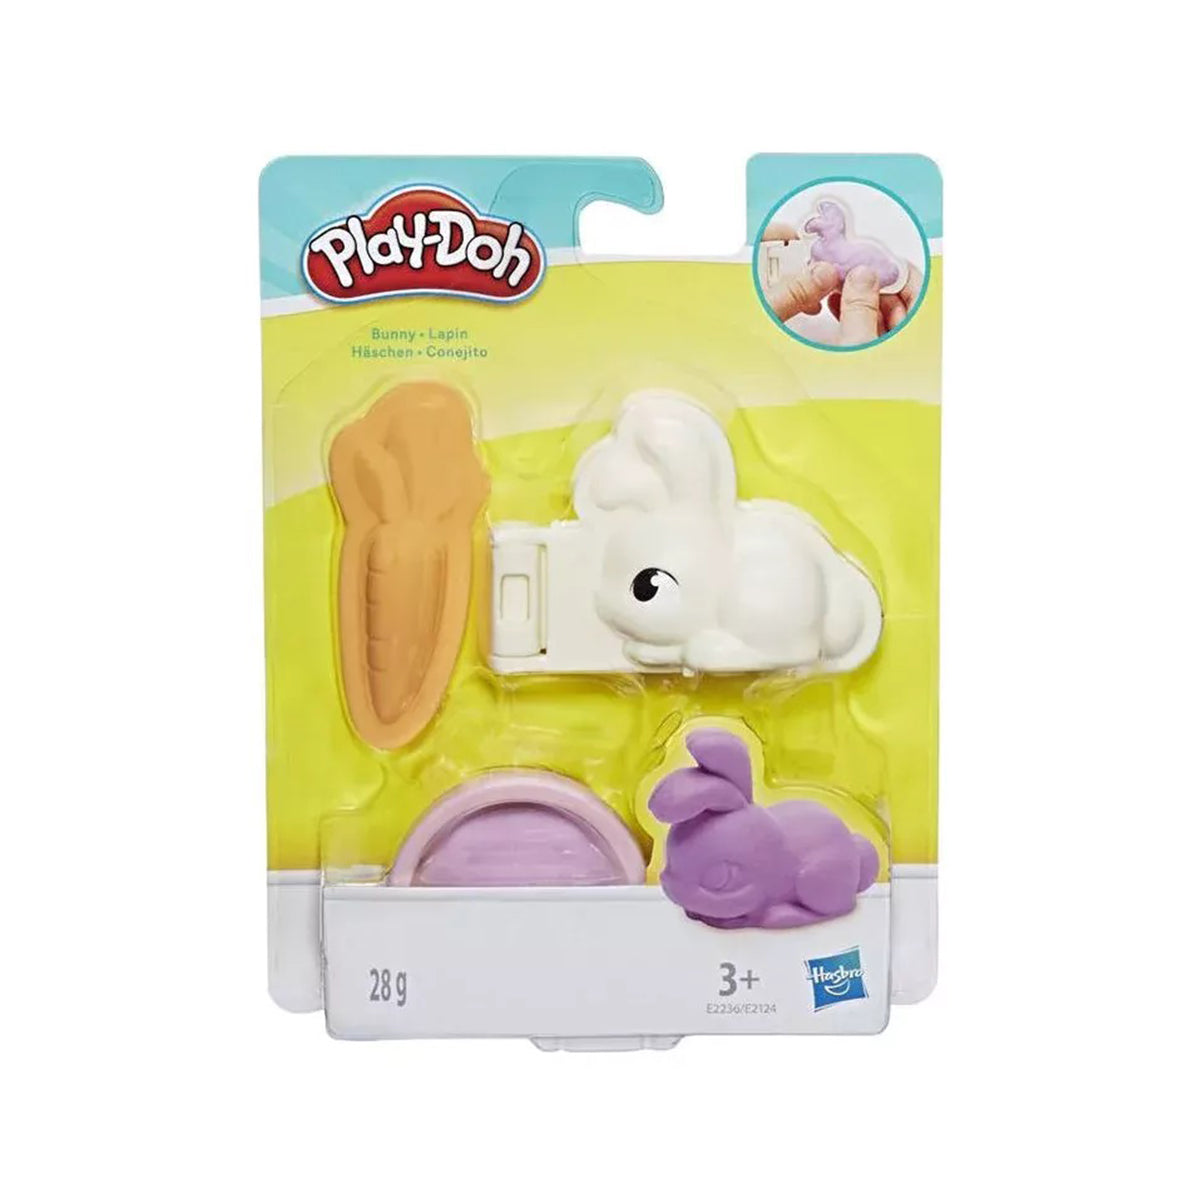 Play-Doh Pet Mini (Styles Vary - One Supplied)